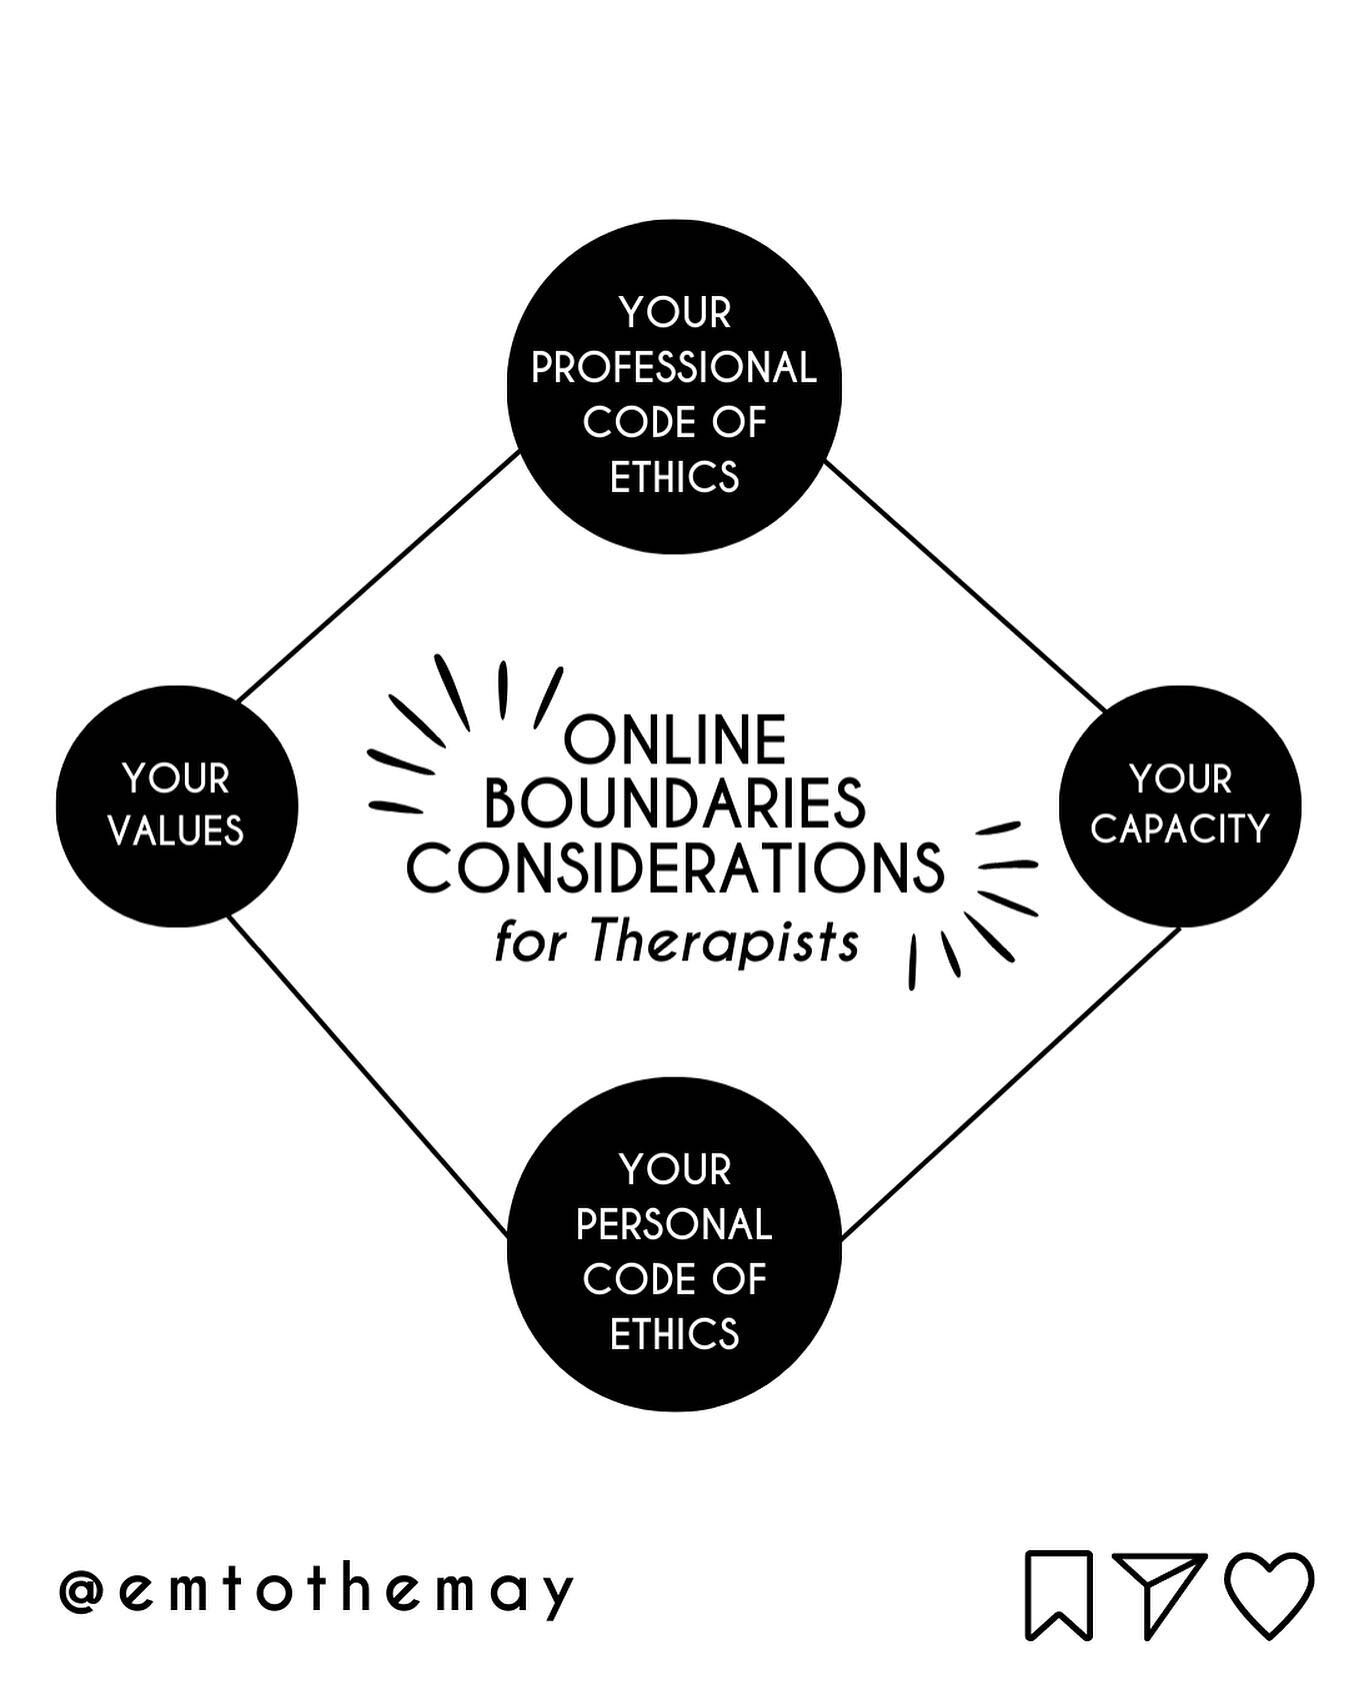 One of the first things I recommend for Therapists starting their journey on social media is that they develop their online boundaries. 

⚡What do you want showing up in this space to look like for you &amp; how will you work it into your current lif